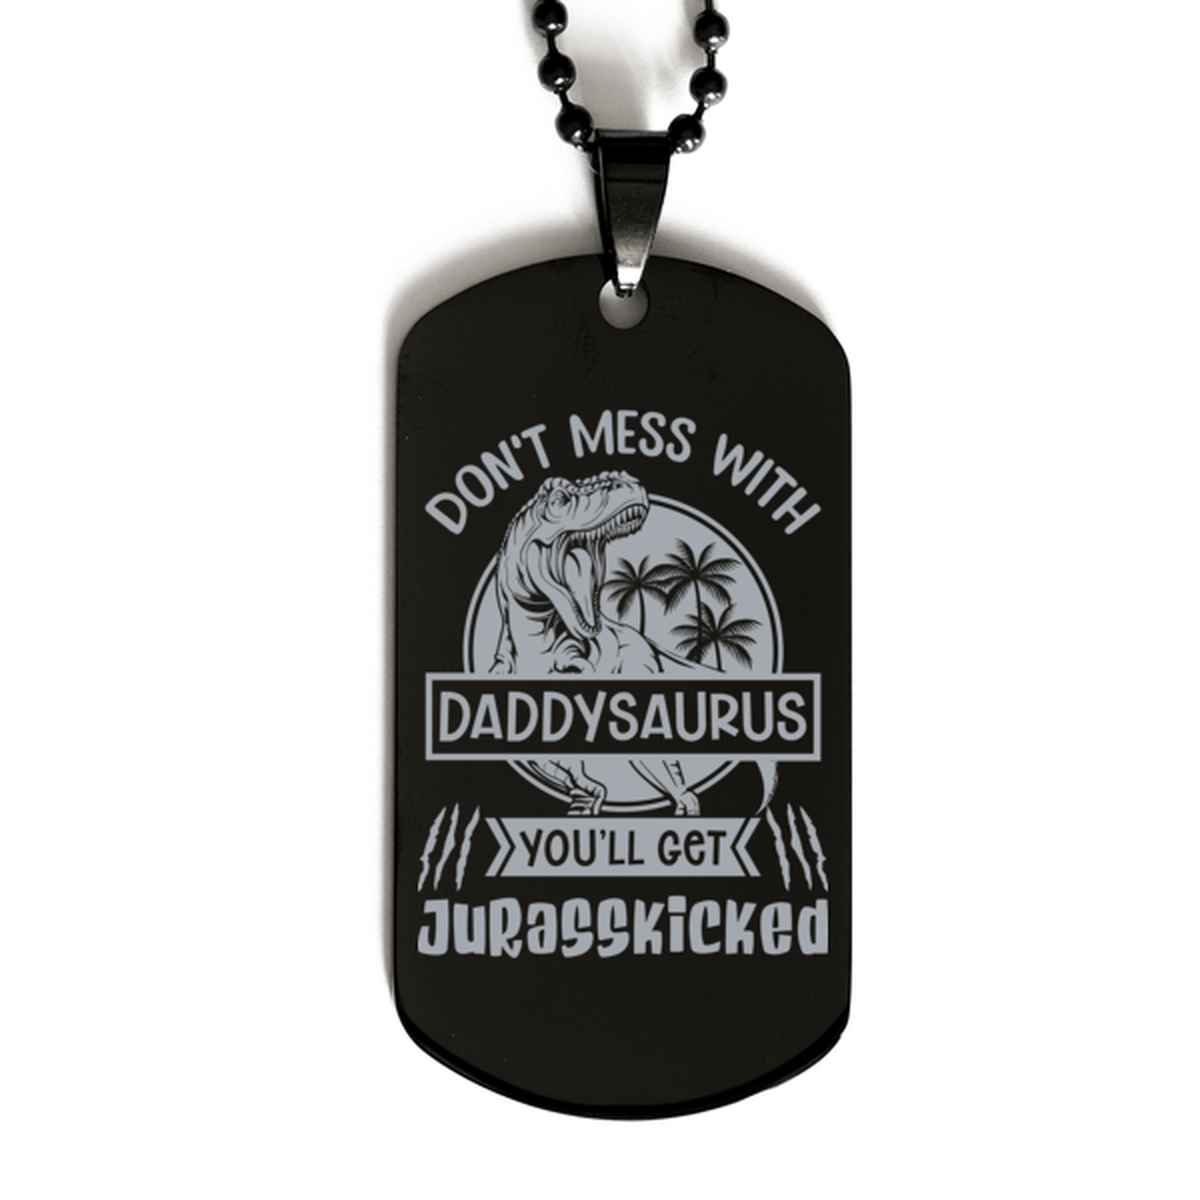 Don't Mess with Daddysaurus You'll Get Jurasskicked Black Dog Tag Necklace - Funny Dinosaur Gift for Daddy - Fathers Day Gift